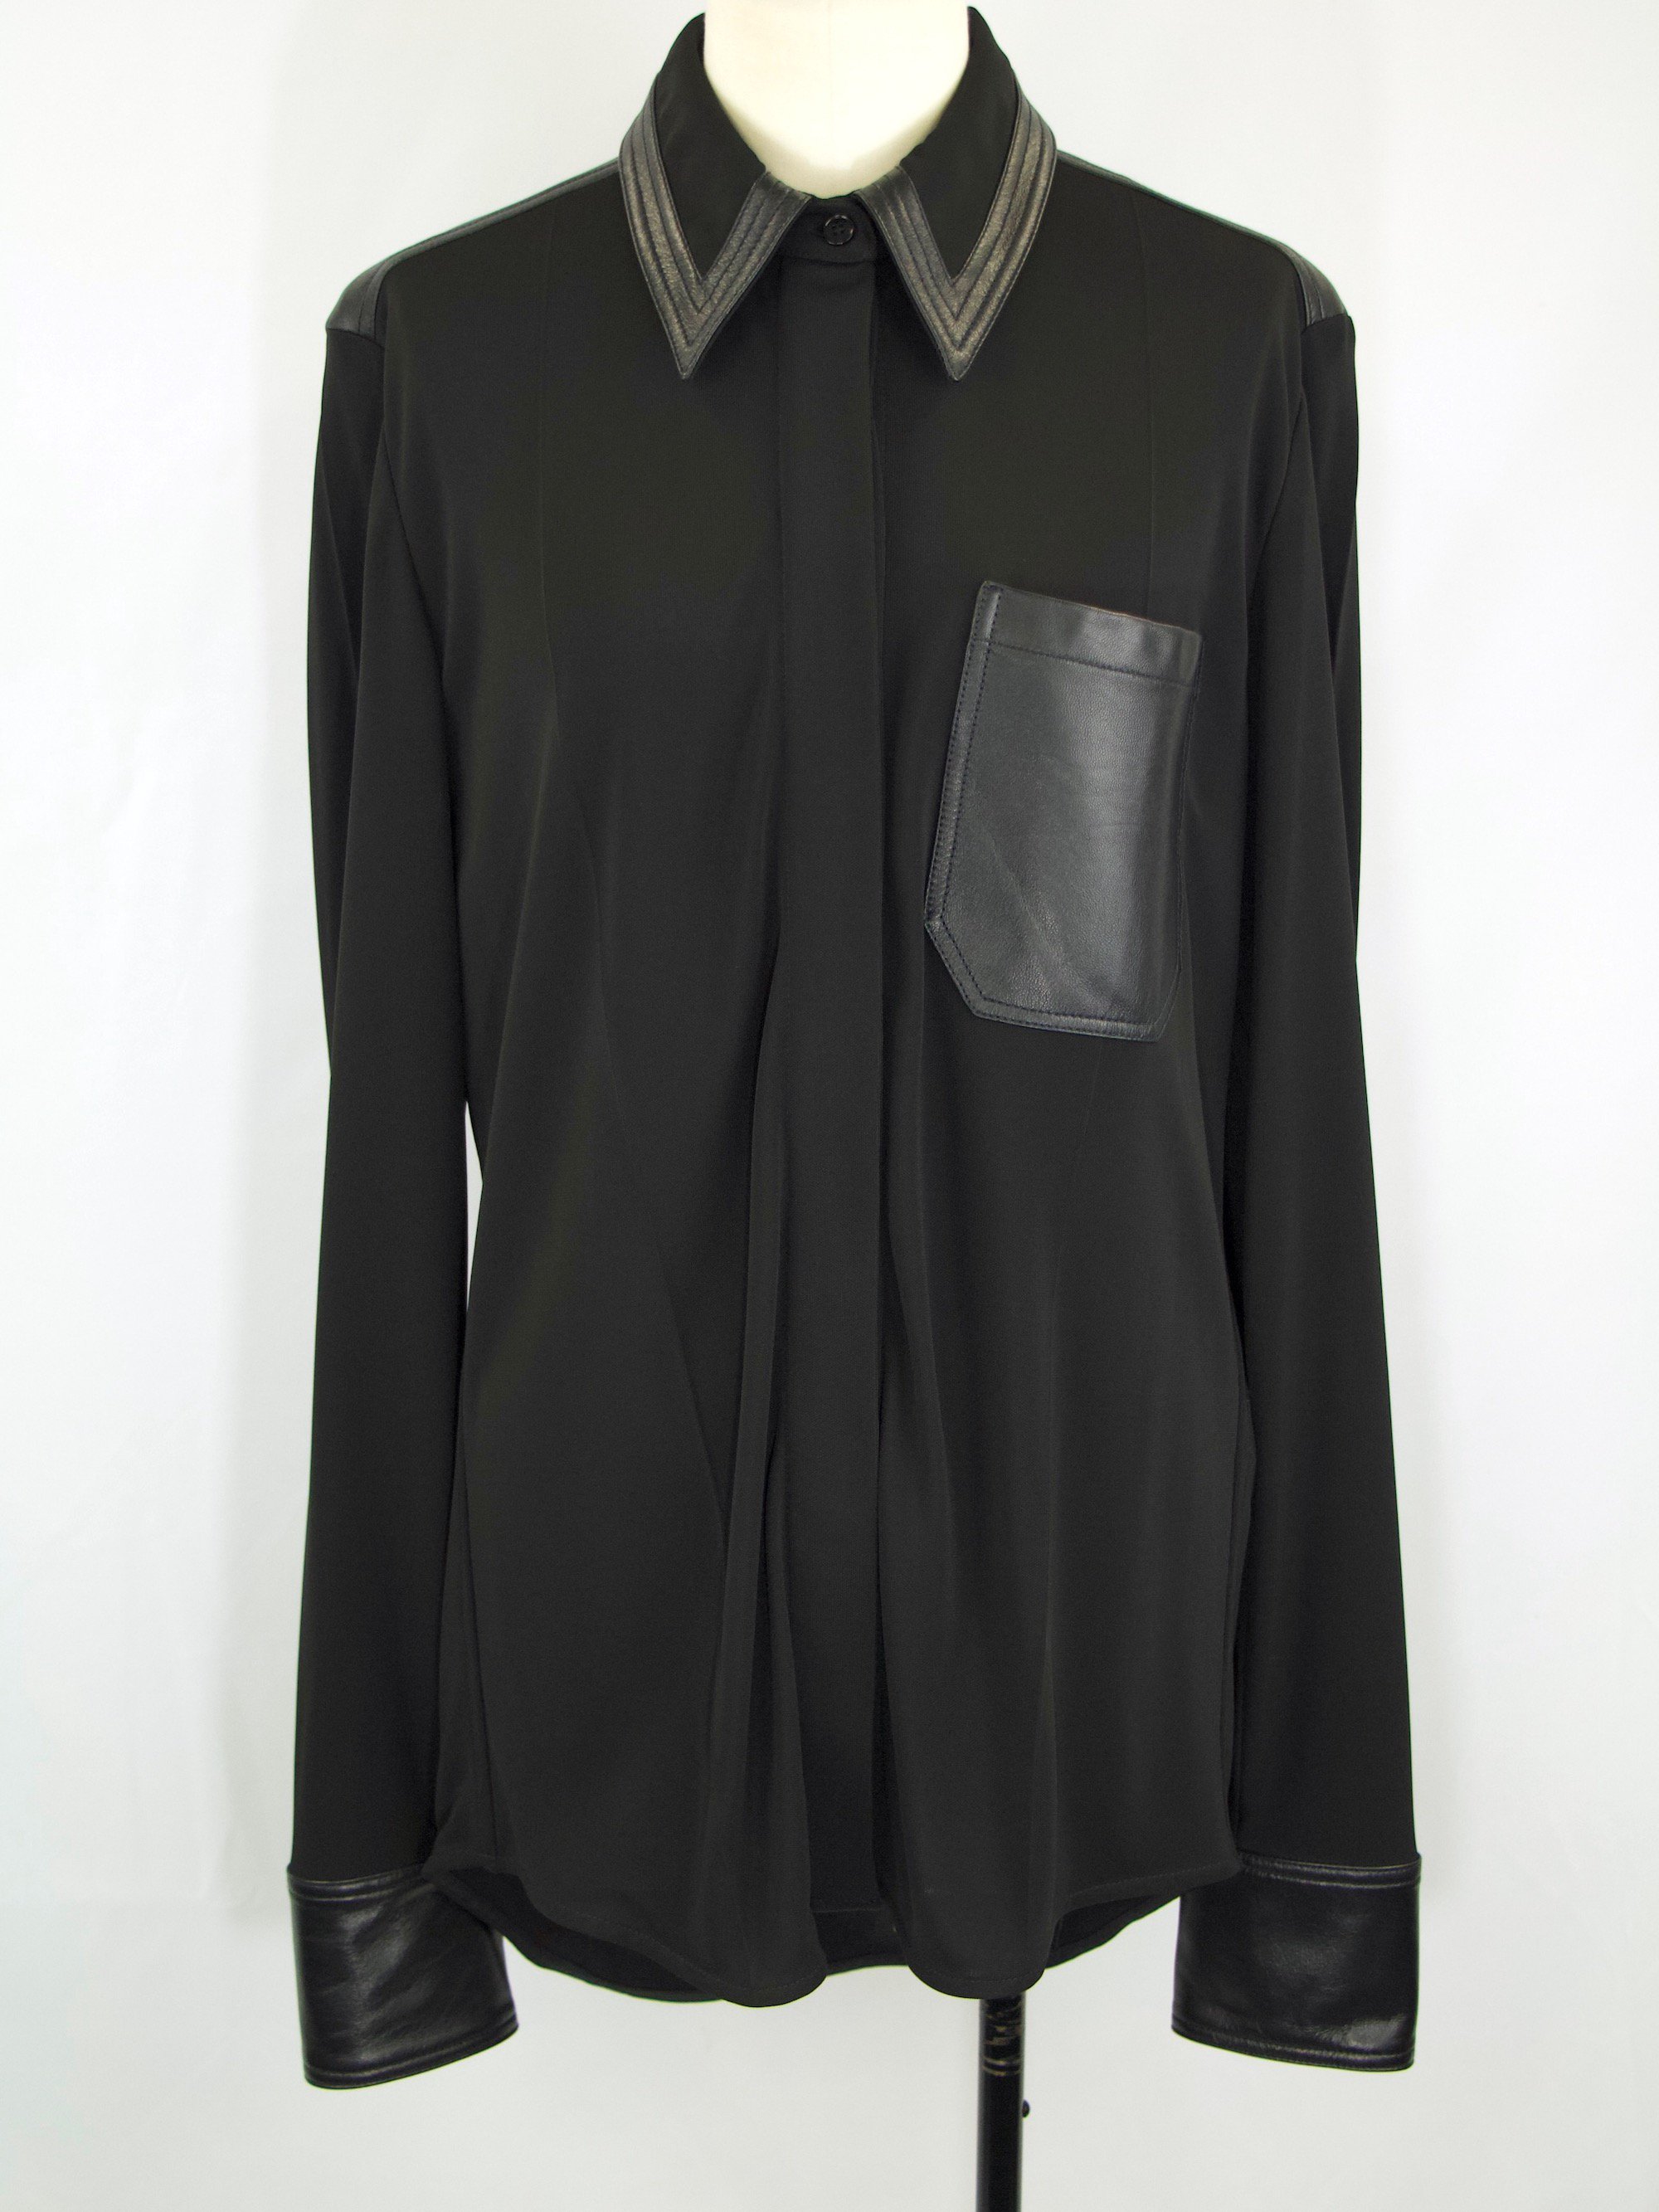 <img class='new_mark_img1' src='https://img.shop-pro.jp/img/new/icons22.gif' style='border:none;display:inline;margin:0px;padding:0px;width:auto;' />【30%OFF】 VICTORIA BECKHAM Leather blouse